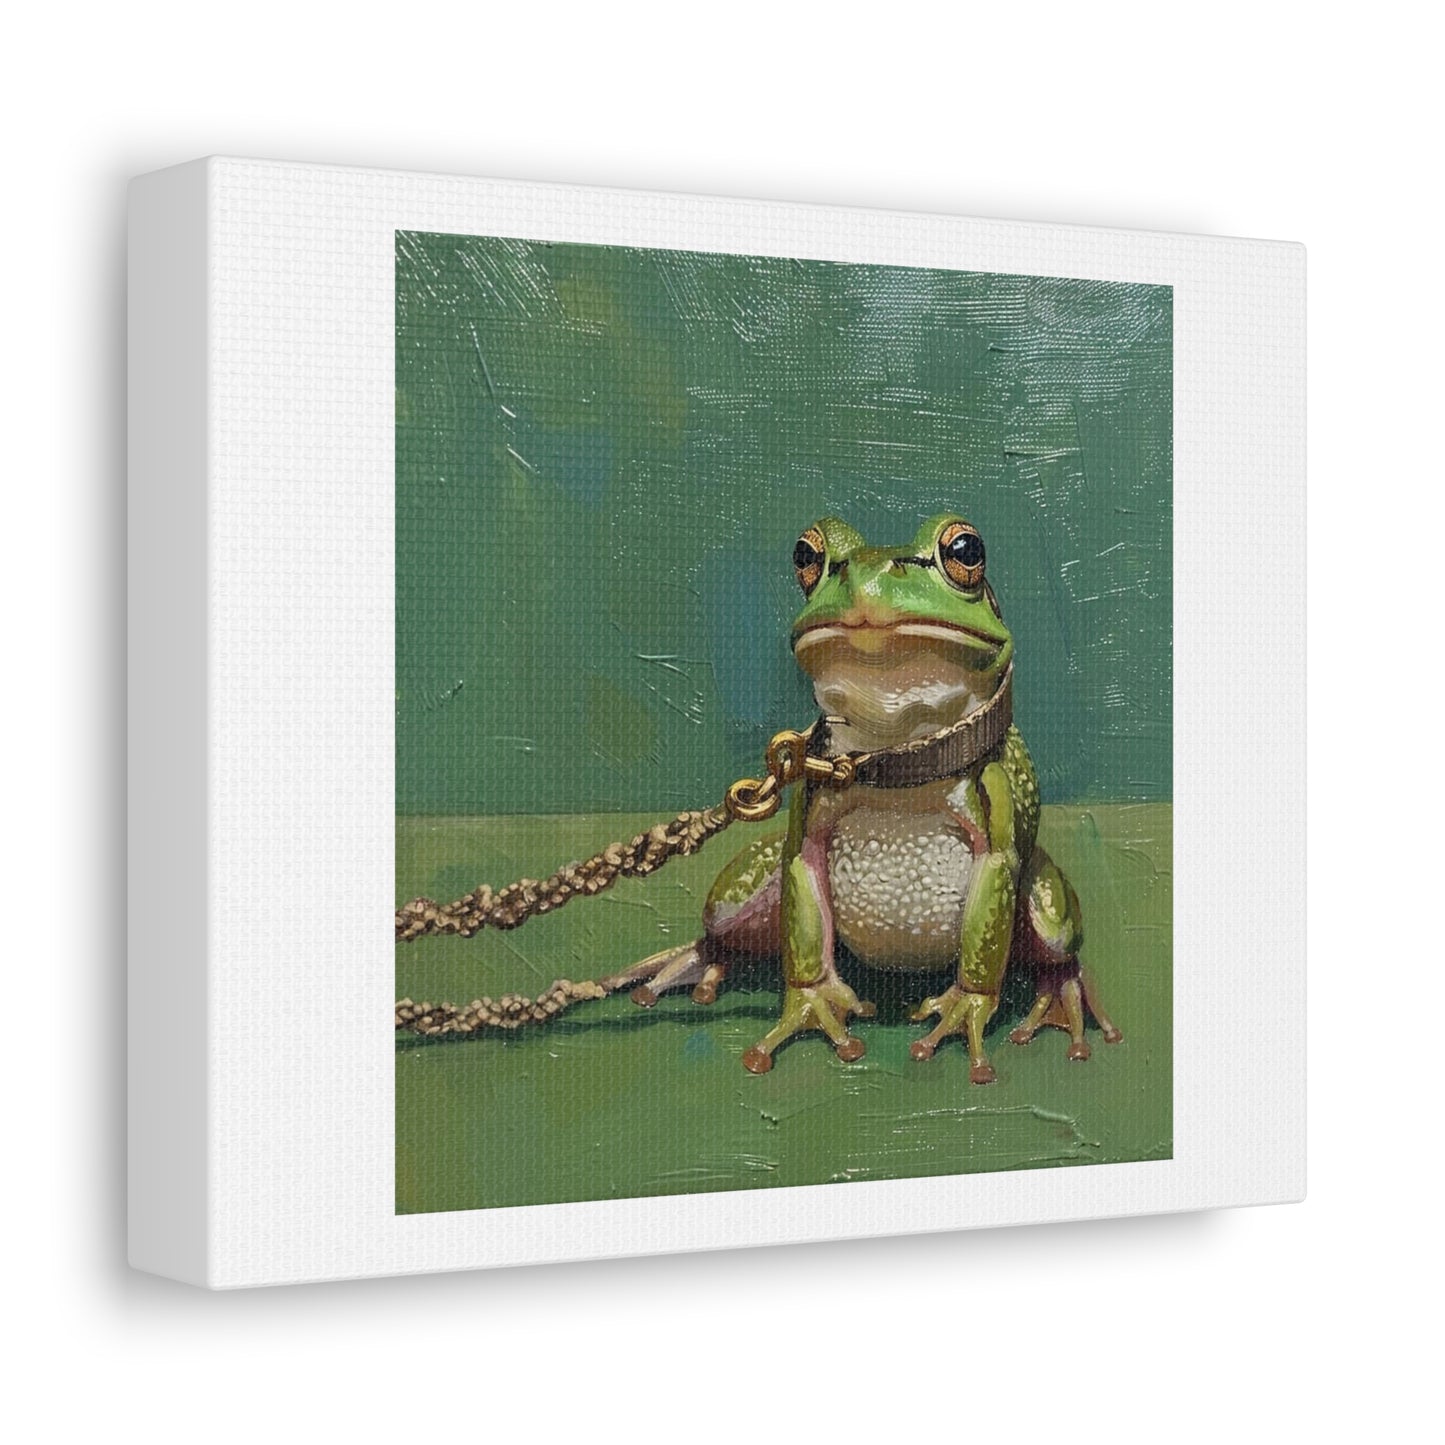 Frog on a Leash, Oil on Canvas 'Designed by AI' Art Print on Canvas